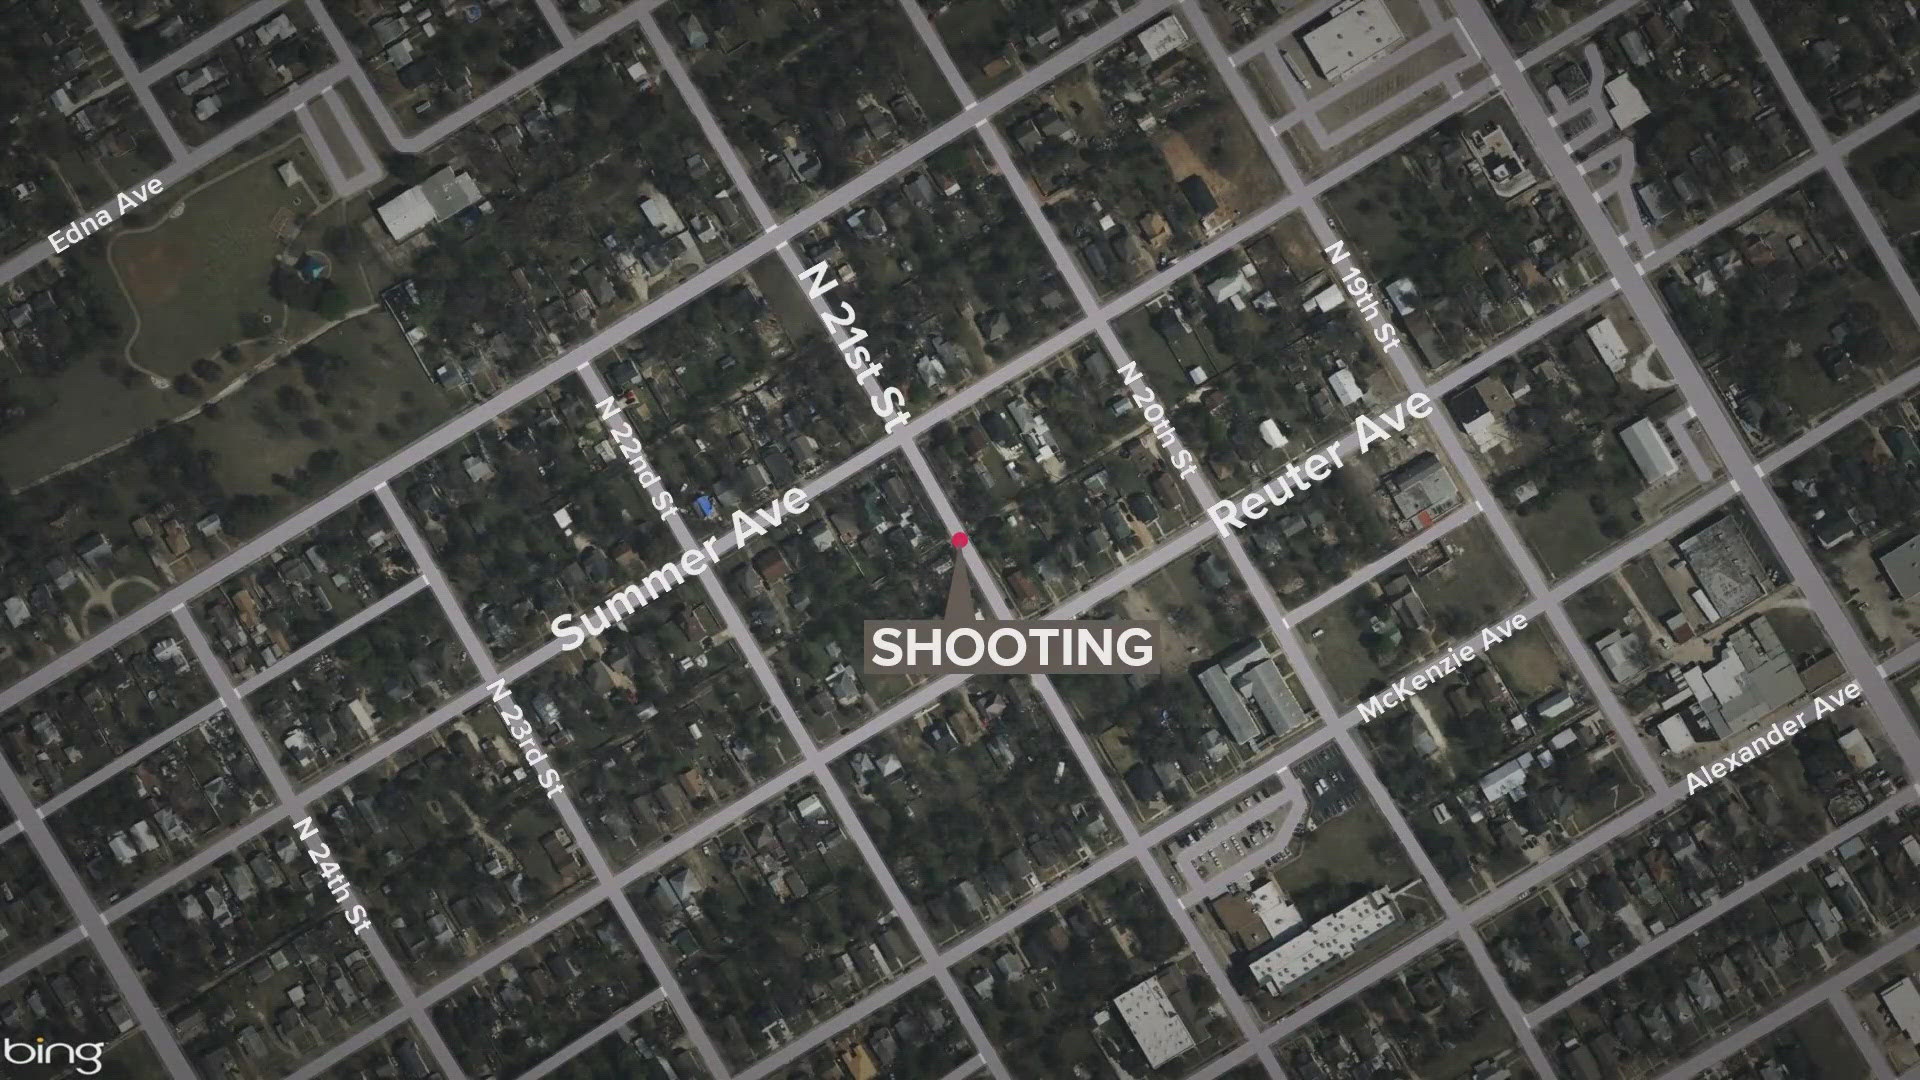 On Monday, June 17, at 10 p.m., a shooting took place in the 2900 block of North 21st Street in Waco. A 16-year-old male was found shot, but died from his injuries.